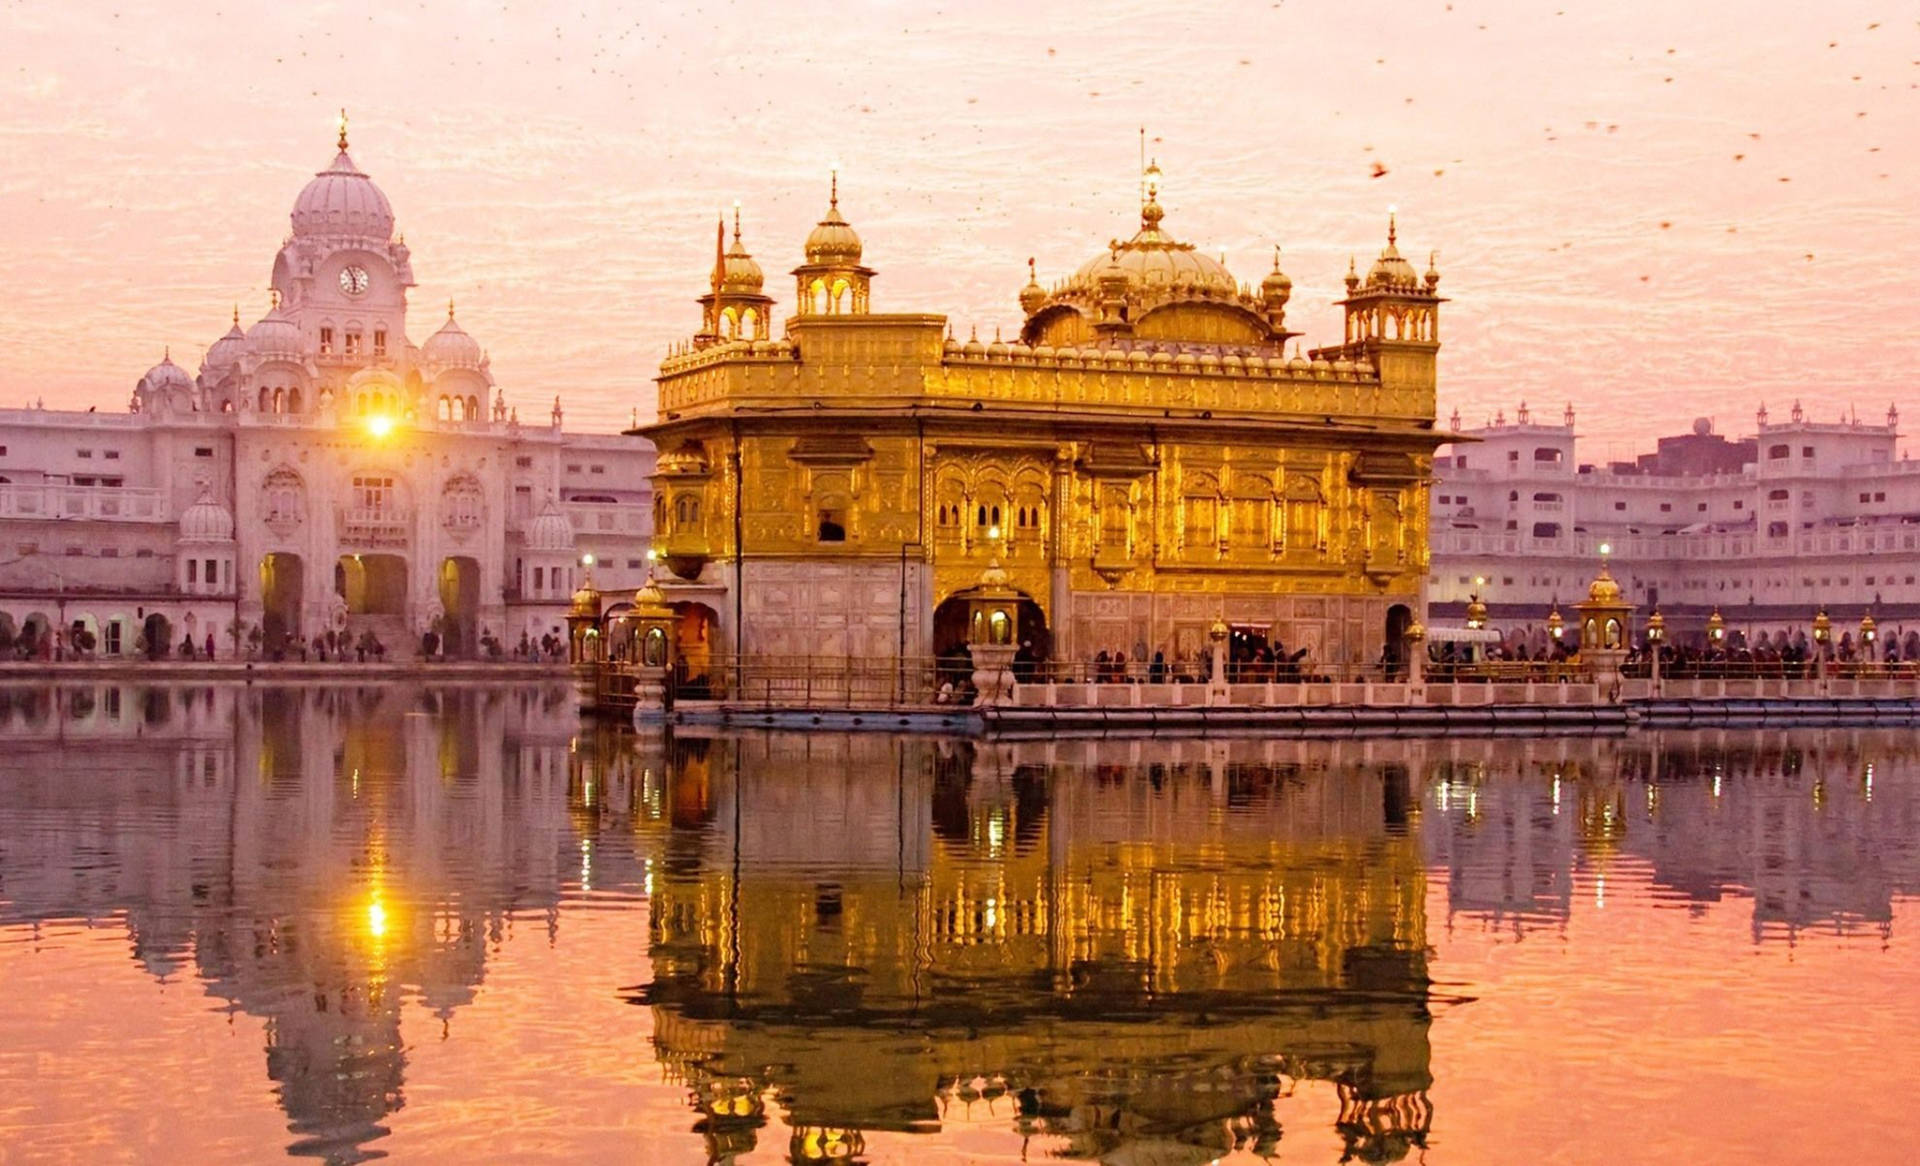 Golden Temple Amritsar Pictures  Download Free Images on Unsplash